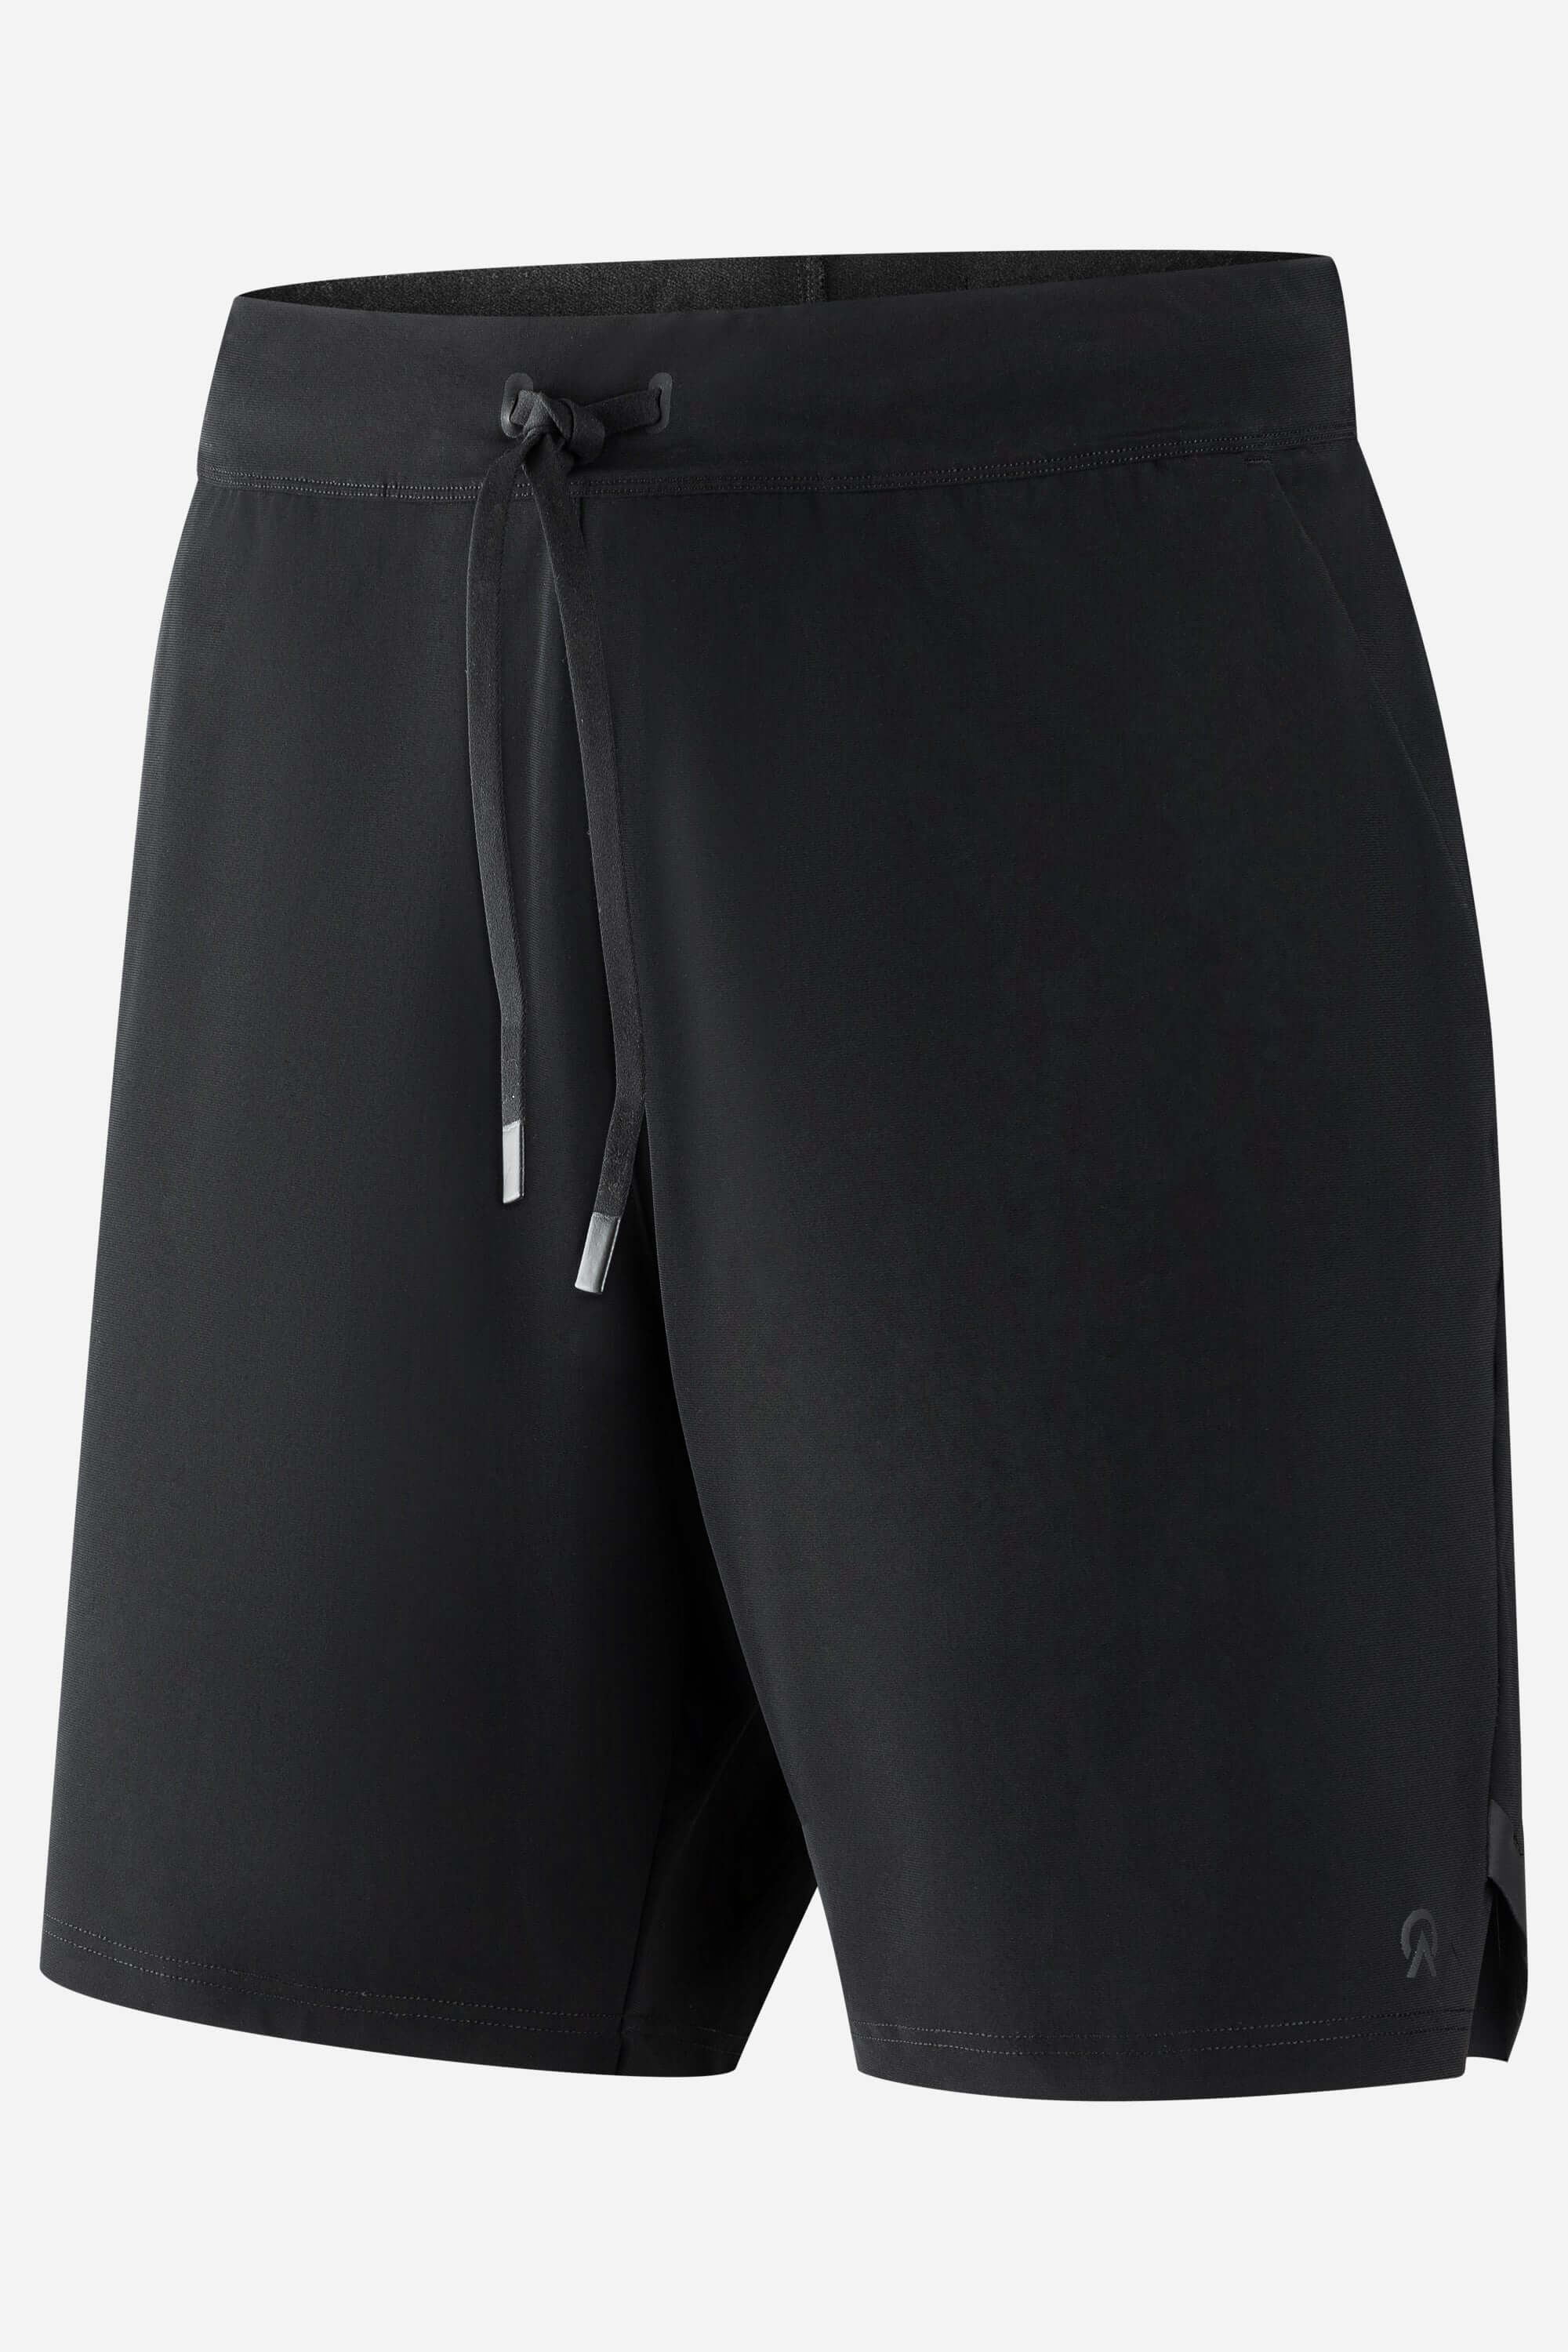 Black gym shorts with pockets front view